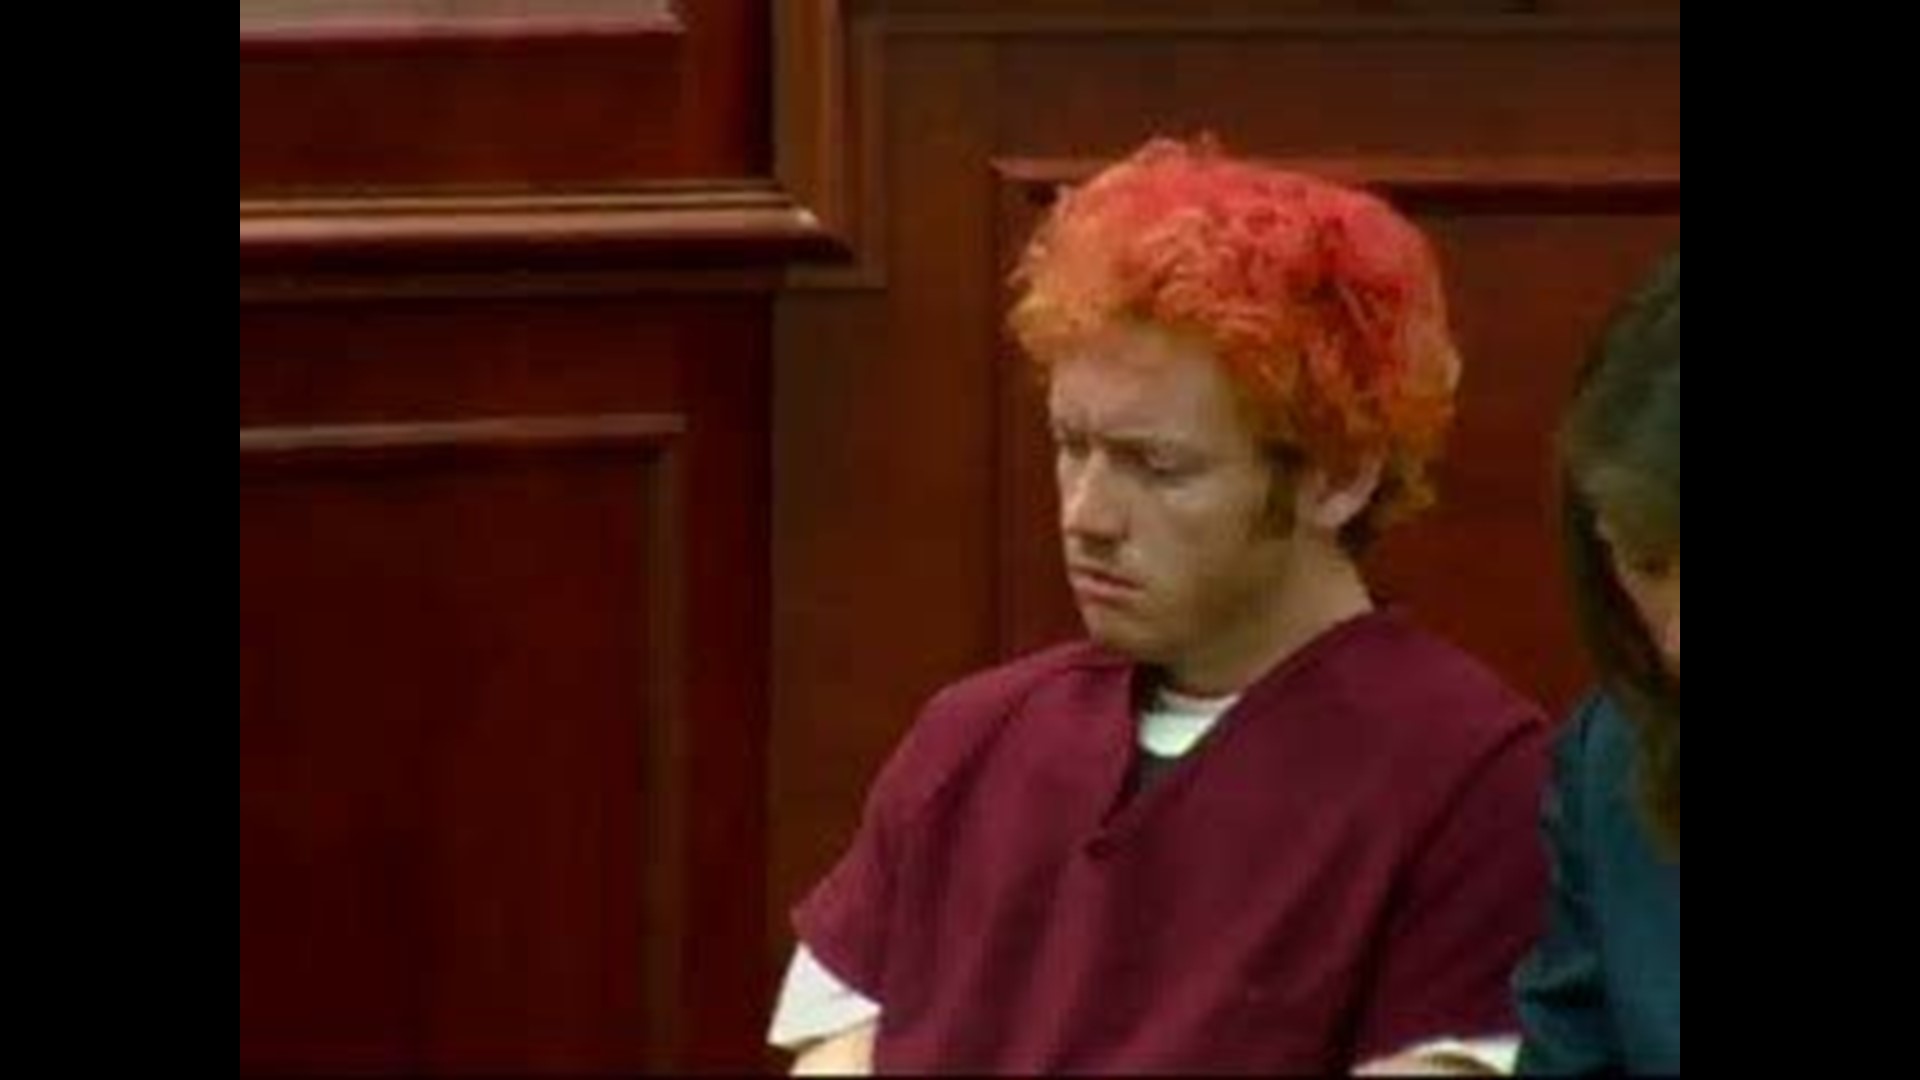 JAMES HOLMES COURT APPEARANCE